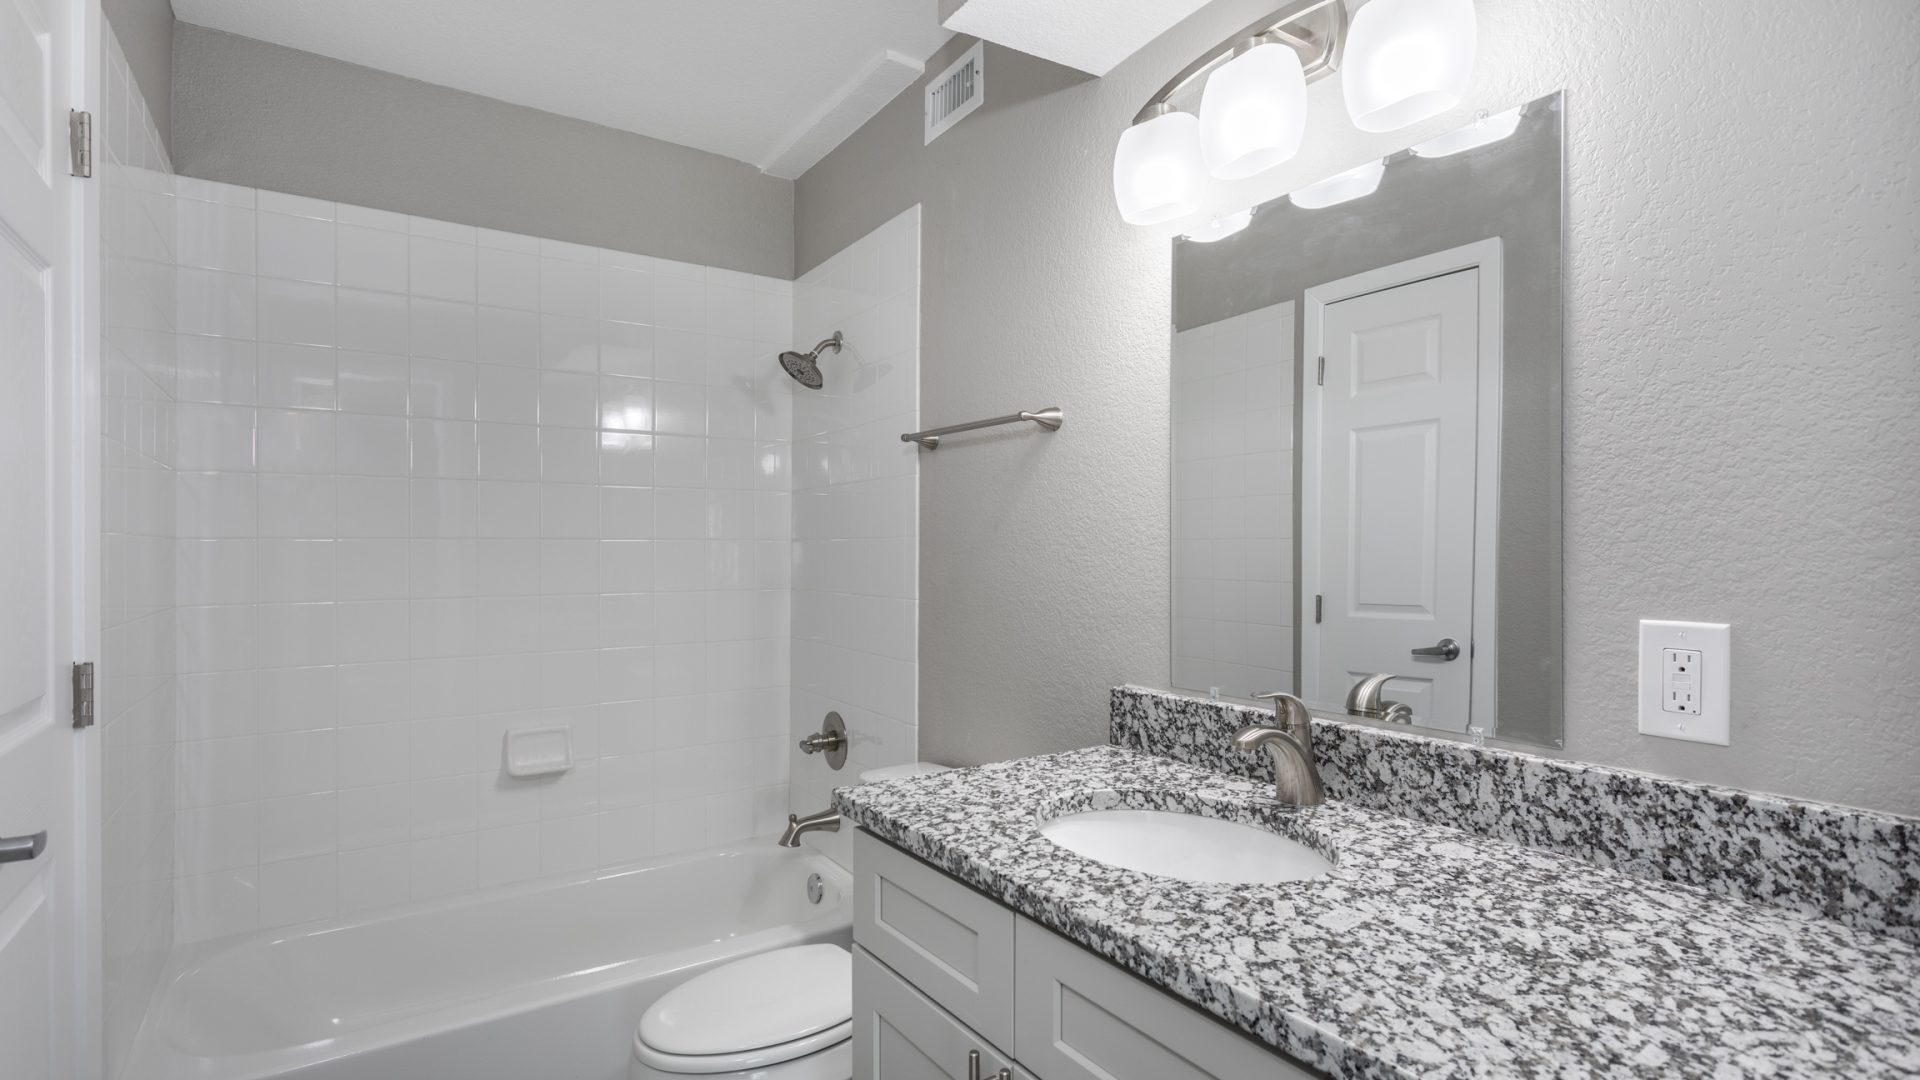 Picture of a bathroom with light gray walls, black and white granite countertops, and a white shower/toilet.